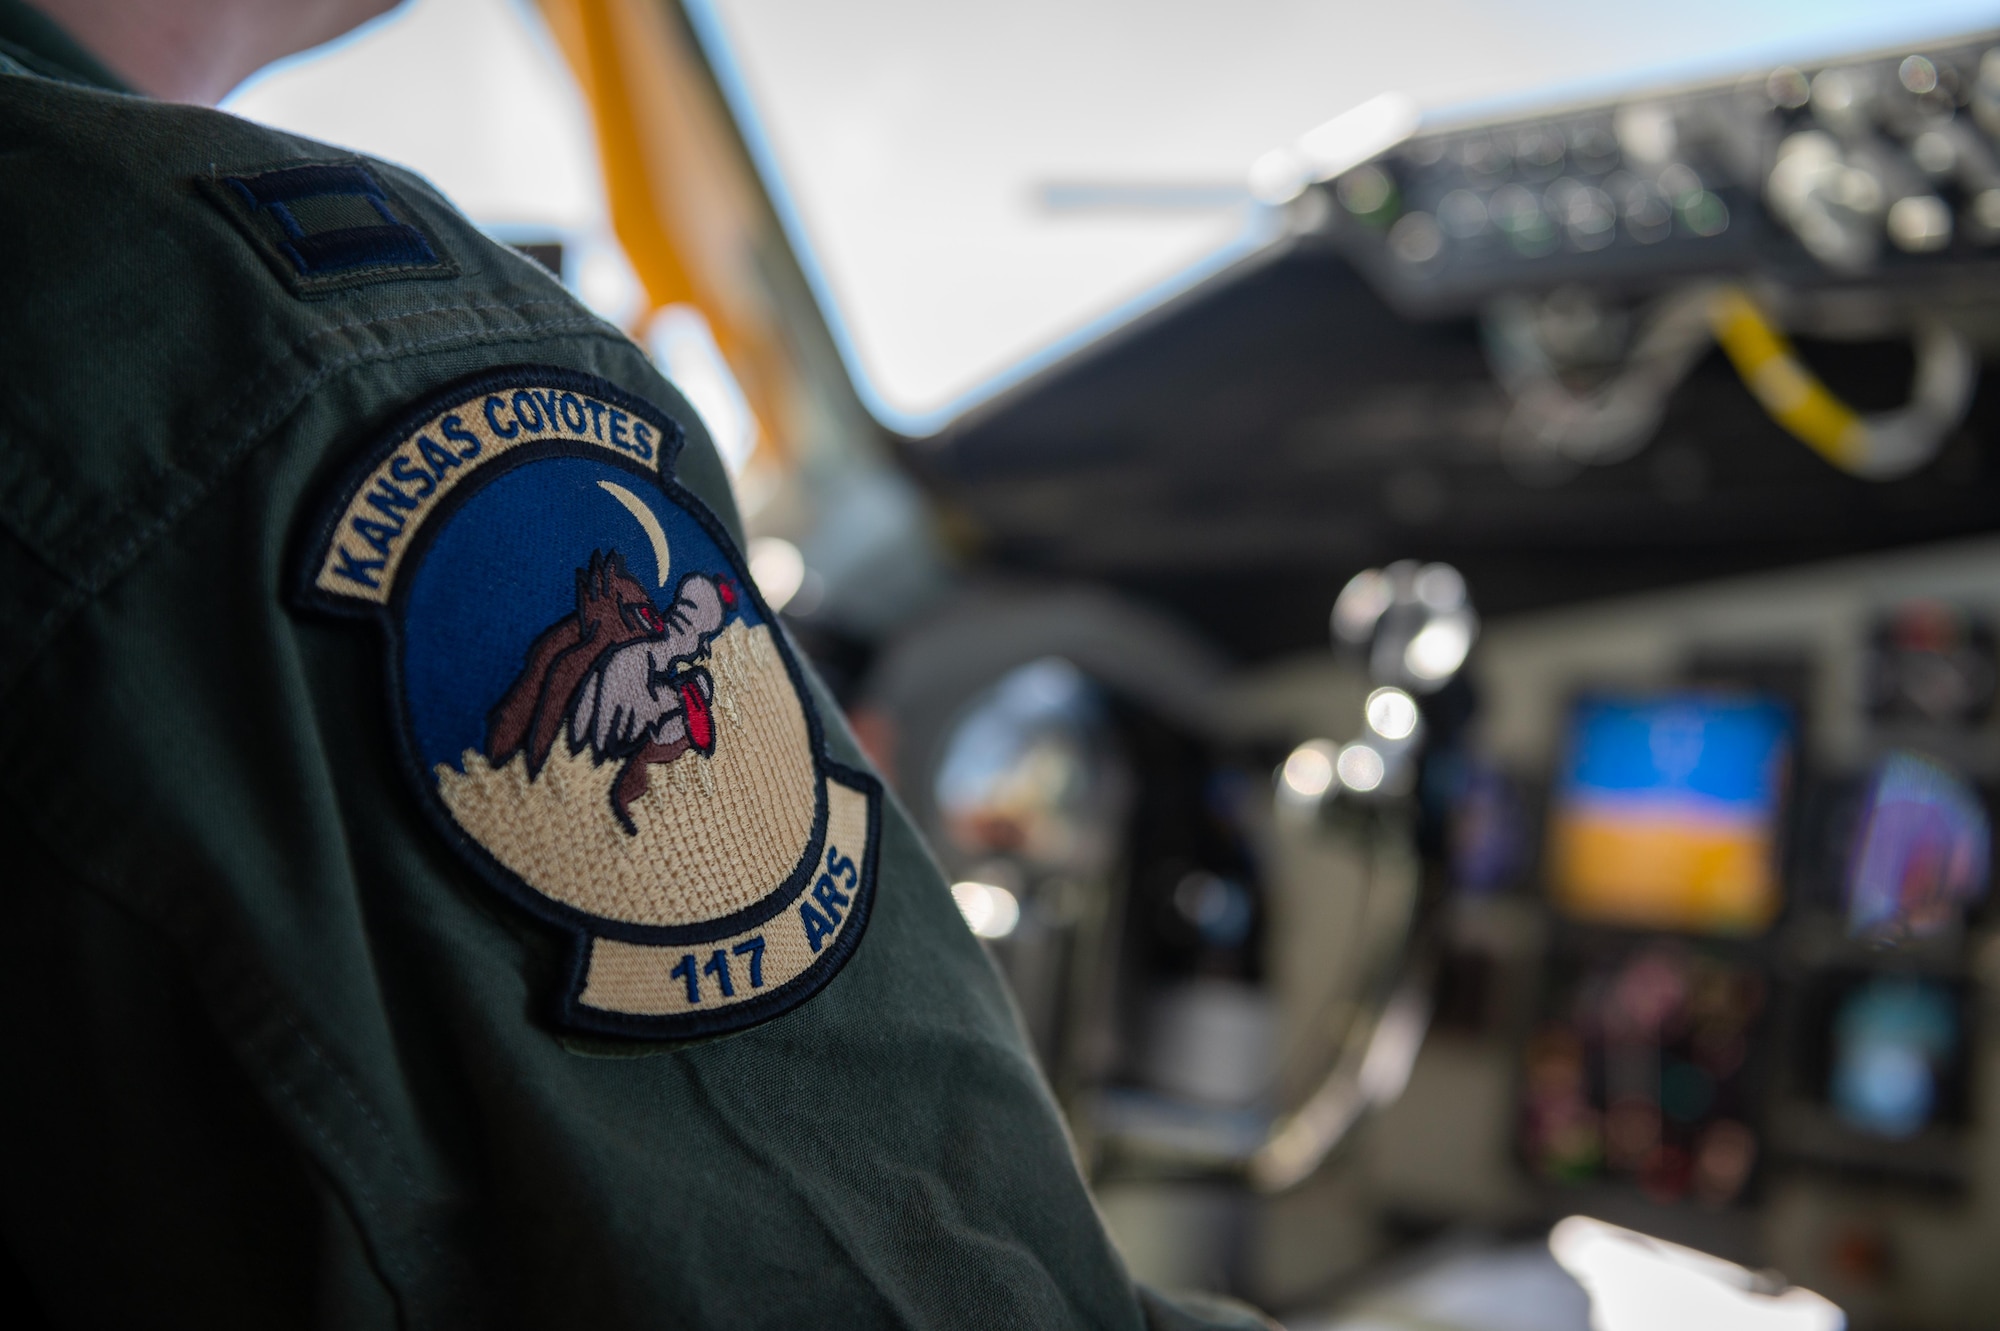 An aircrew patch from the 117th Air Refueling Squadron